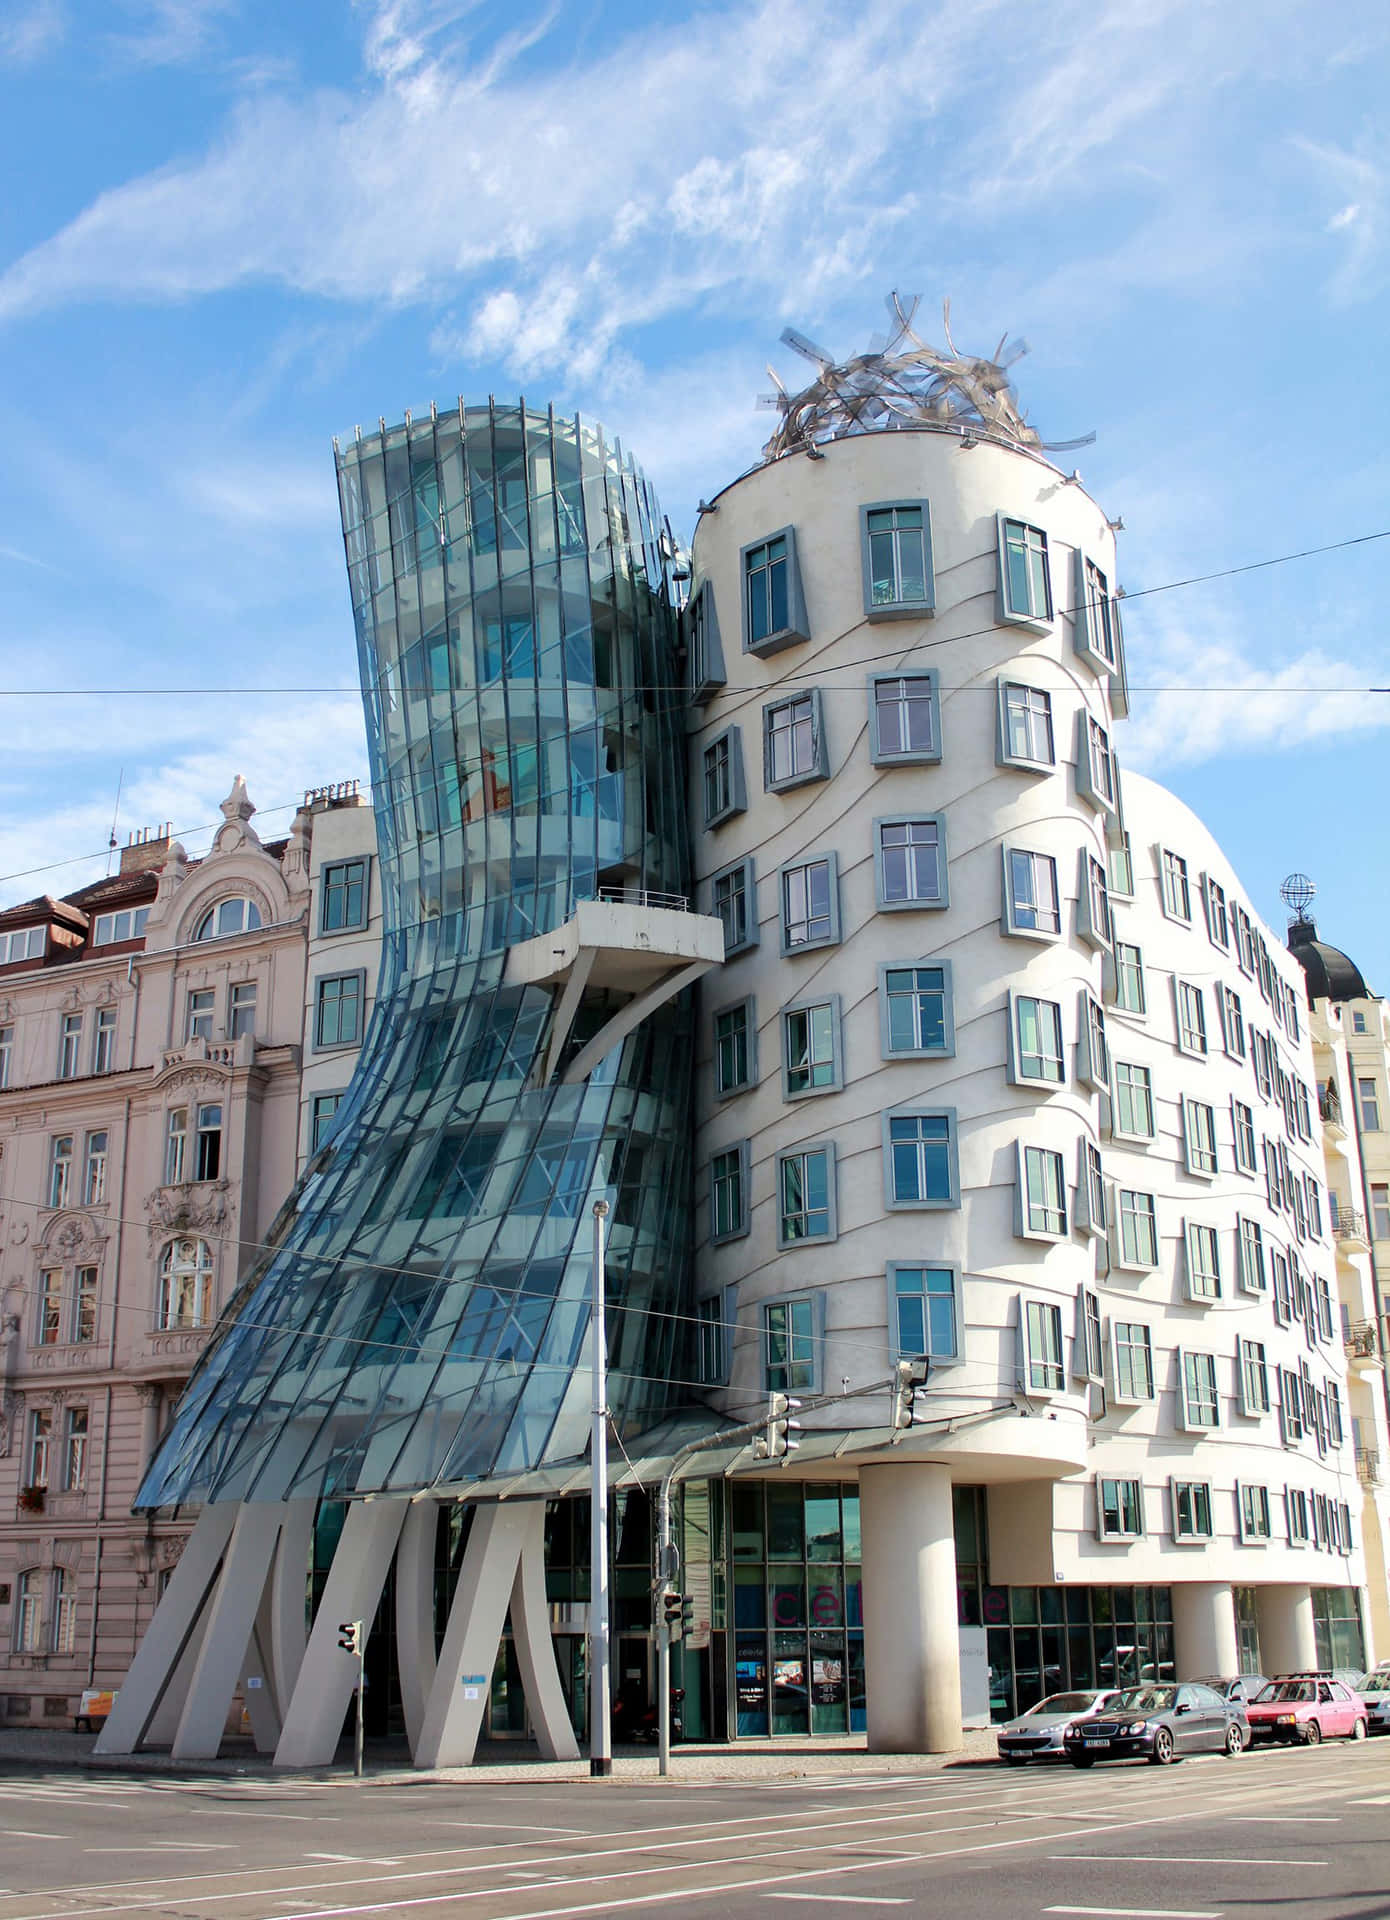 "Architectural Marvel - The Dancing House on a Sunny Day" Wallpaper